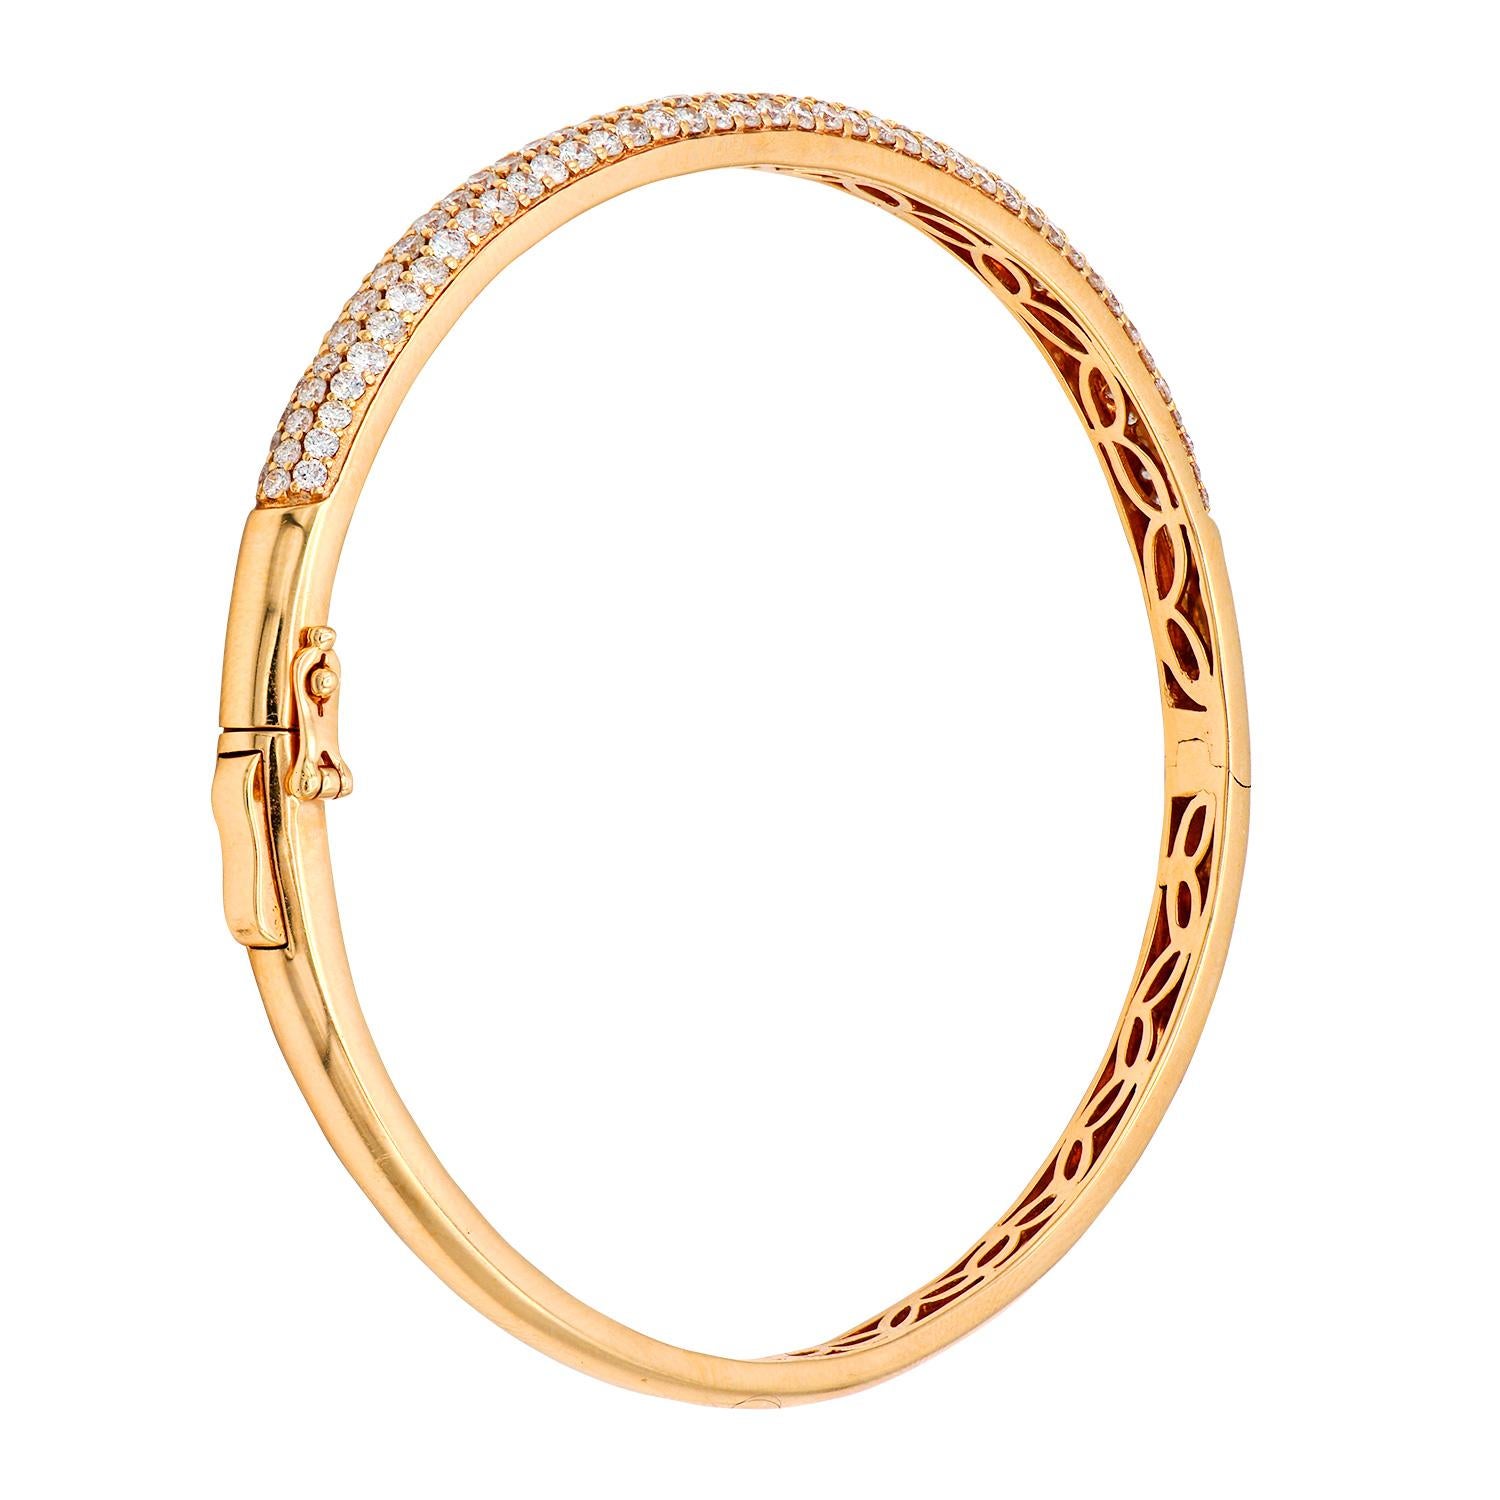 Fashion and glam are at the forefront with this exquisite diamond bangle. This 18 karat rose gold bracelet is made from 12.1 grams of gold. The top is adorned with three rows of VS2, G color diamonds made out of 54 diamonds totaling 1.91 carats,